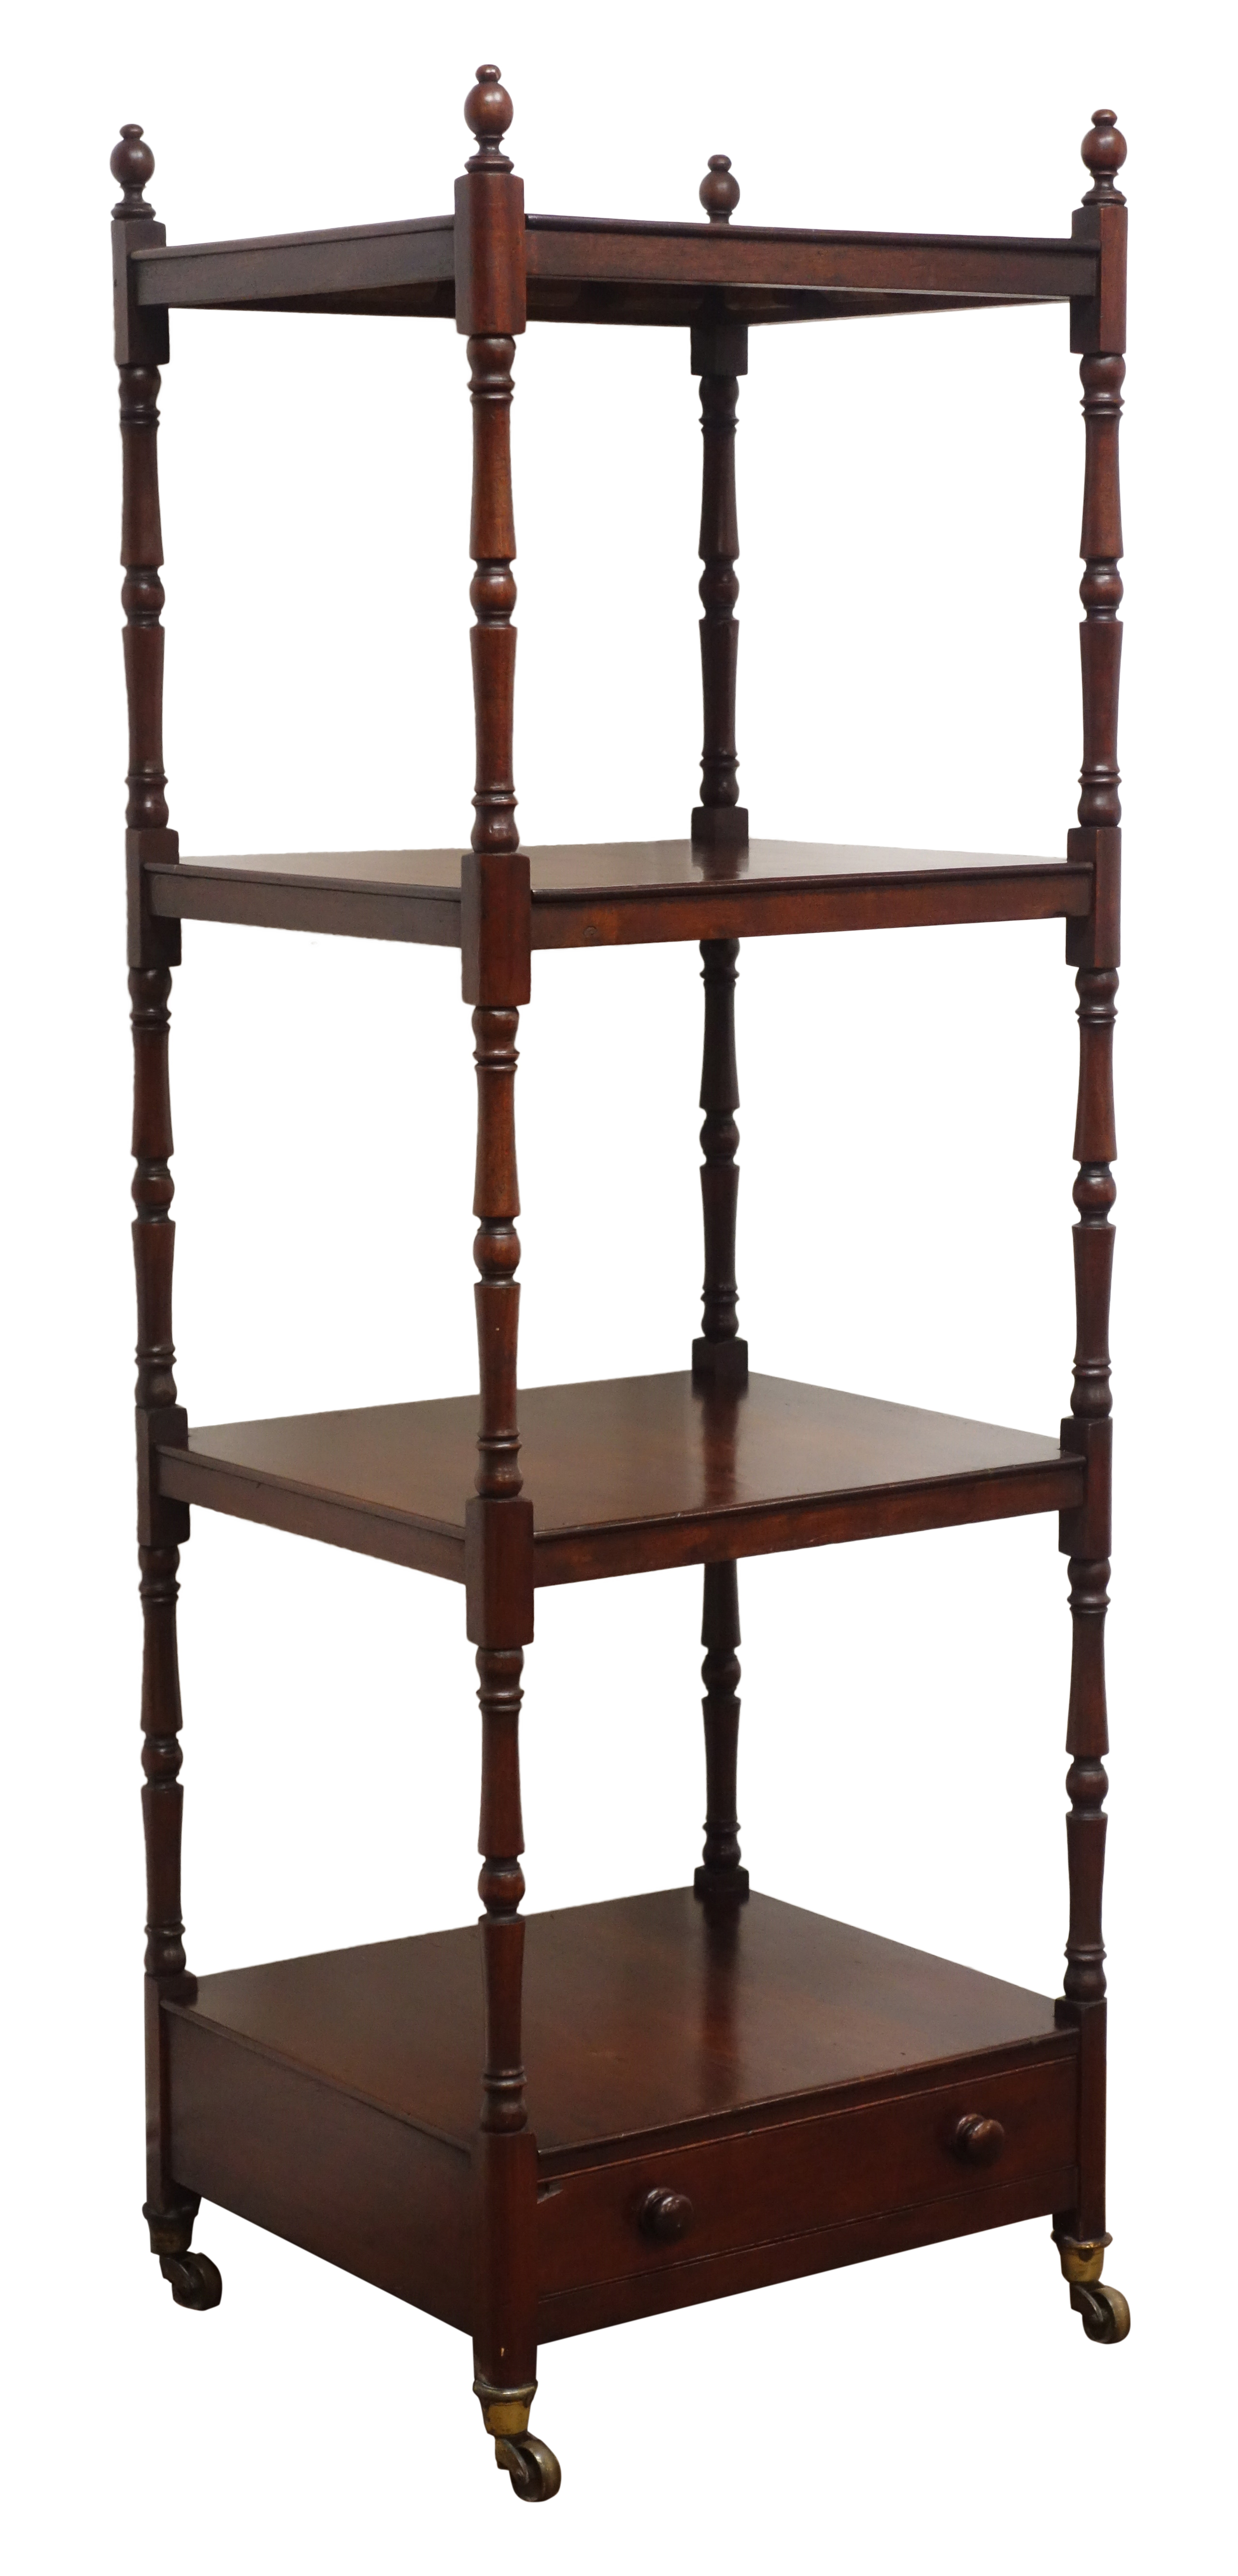 Early 19th century mahogany what-not, four tiers on turned supports with finials, - Image 2 of 4